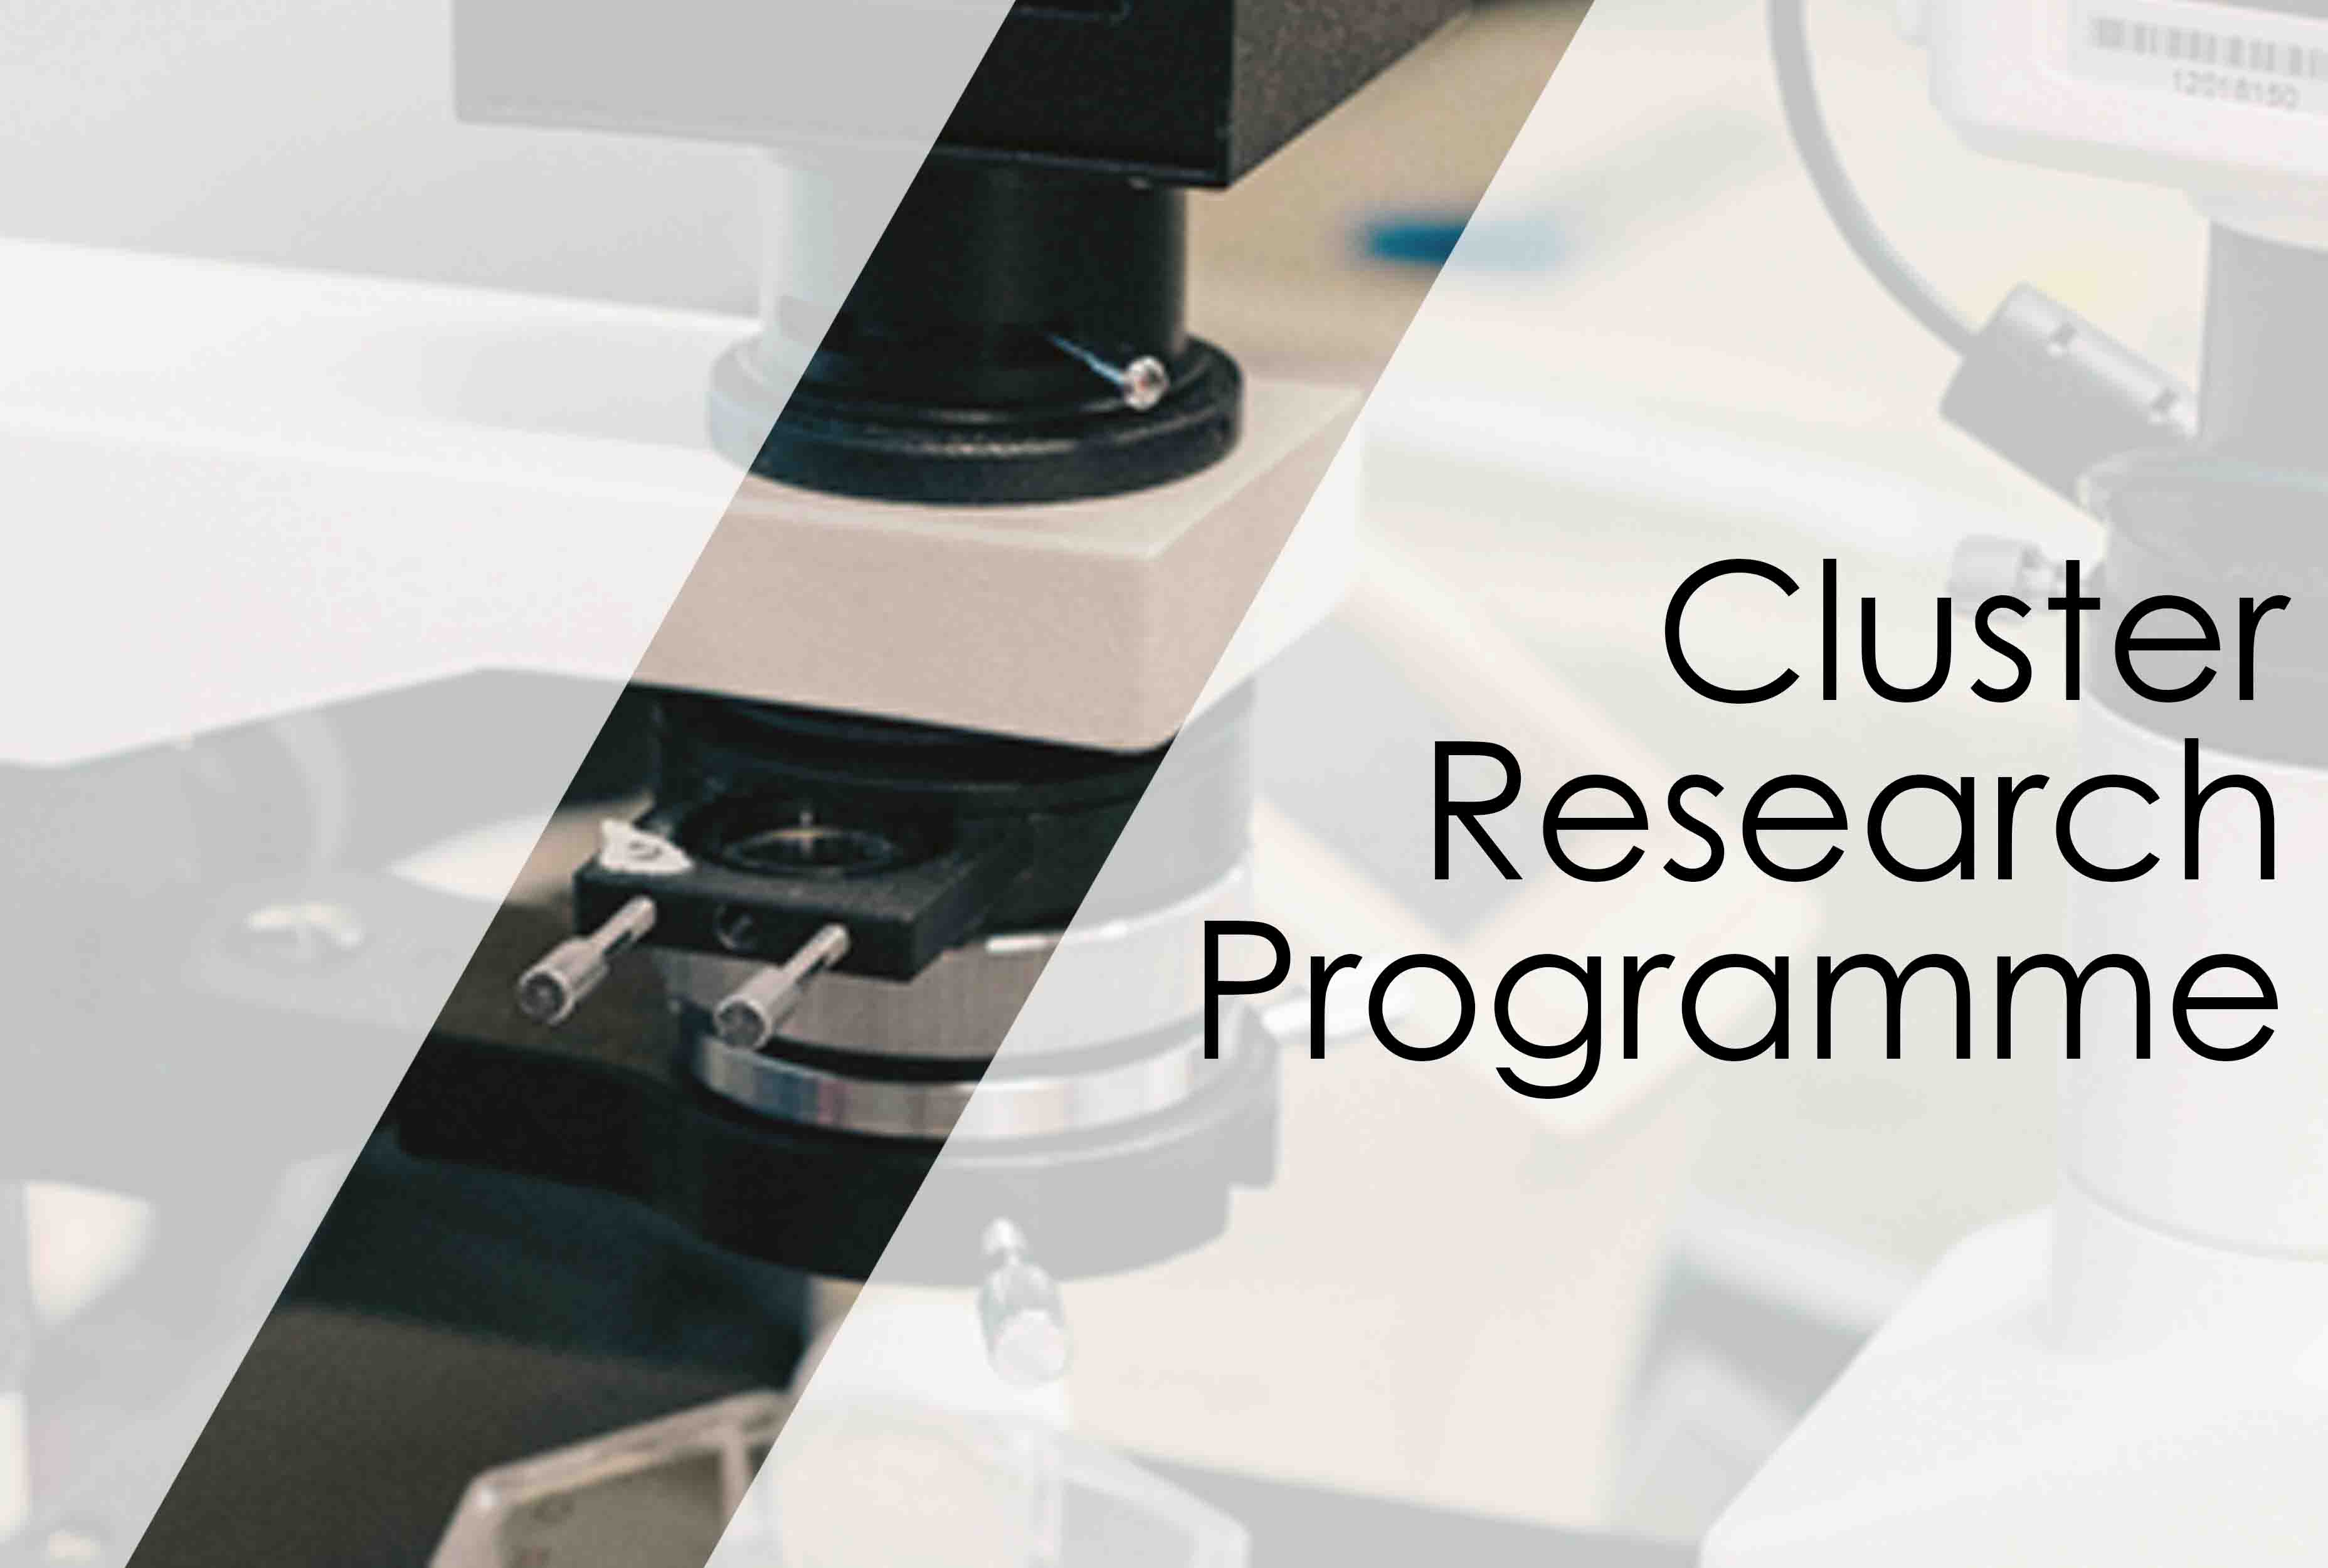 Cluster research programme